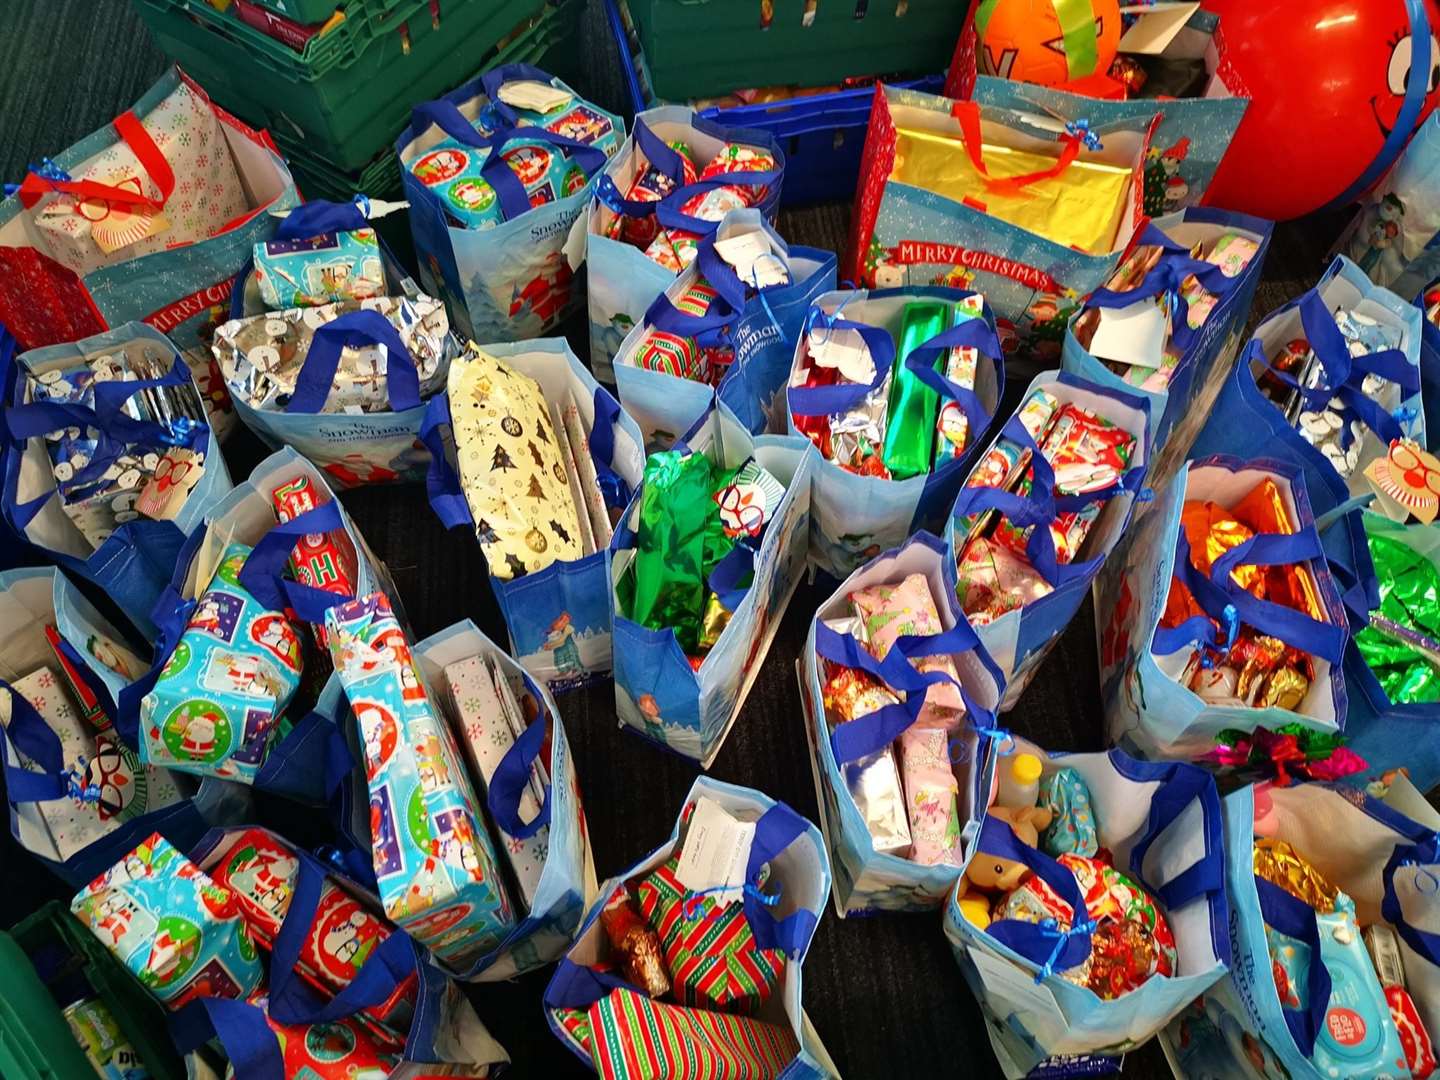 Funds helped to create 13 food hampers and provide gifts for 35 children.